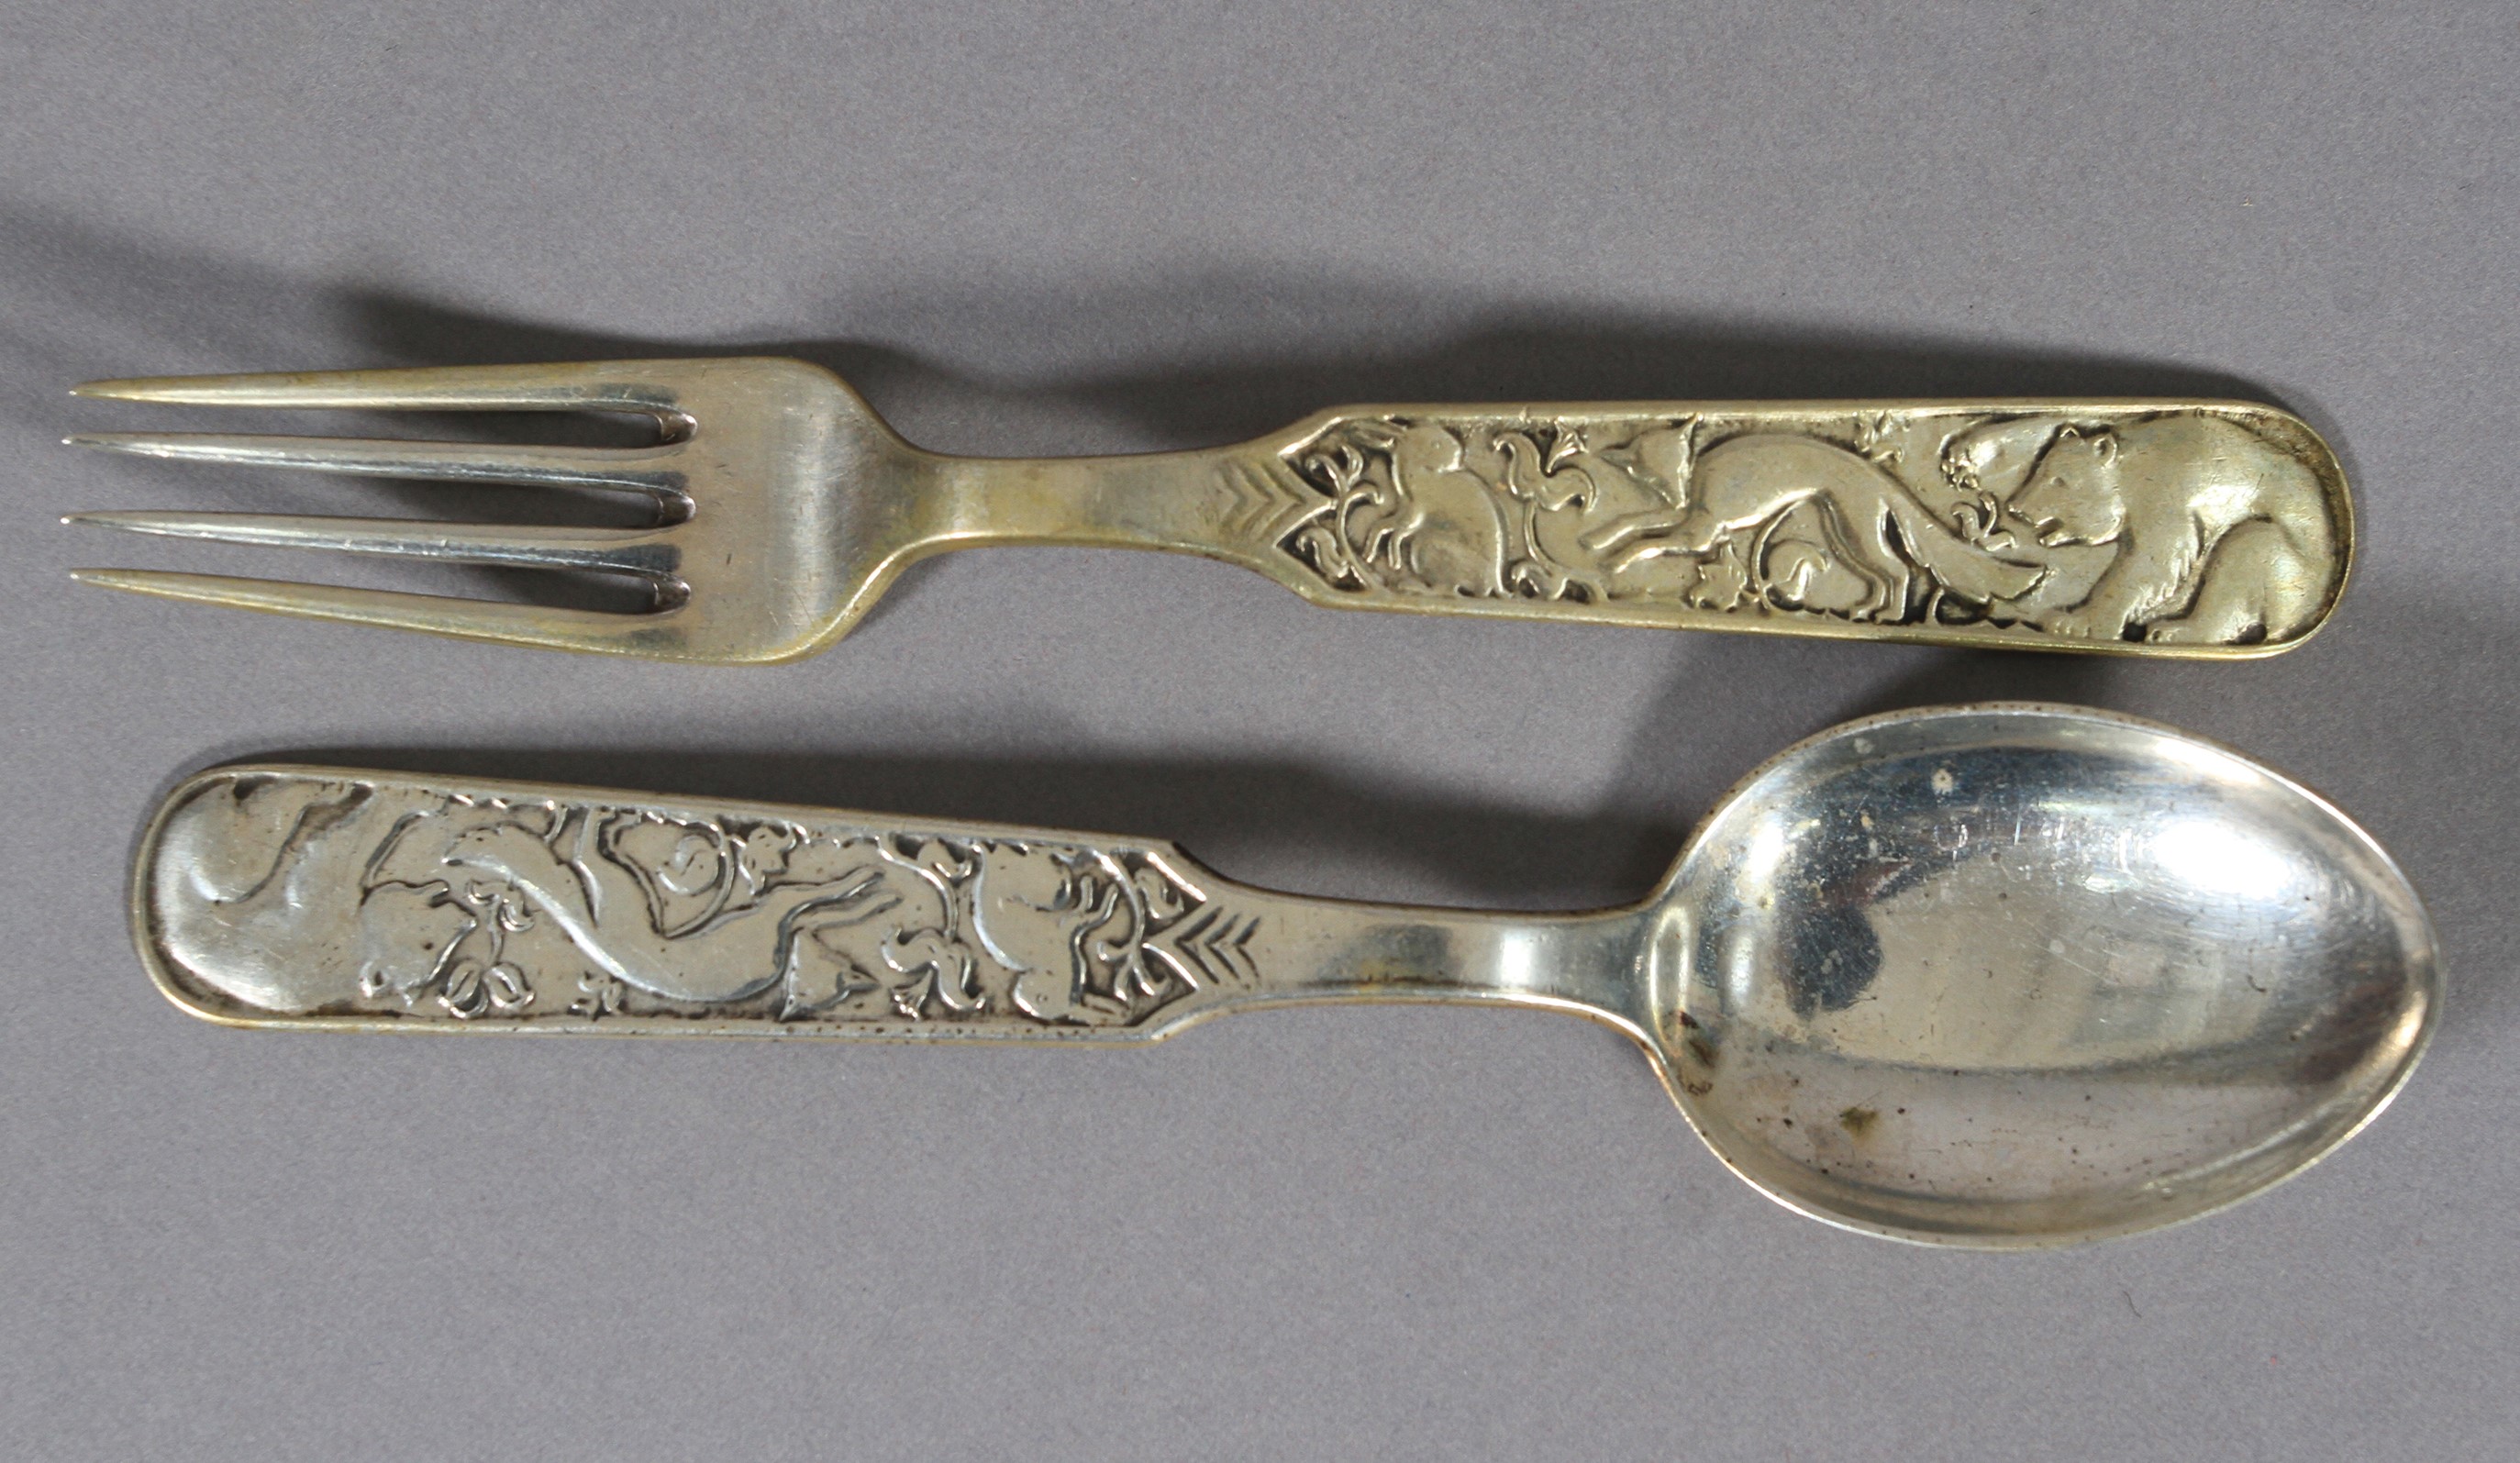 DAVID ANDERSEN, Norway, a child's .830 sterling silver spoon and fork set, each handle decorated